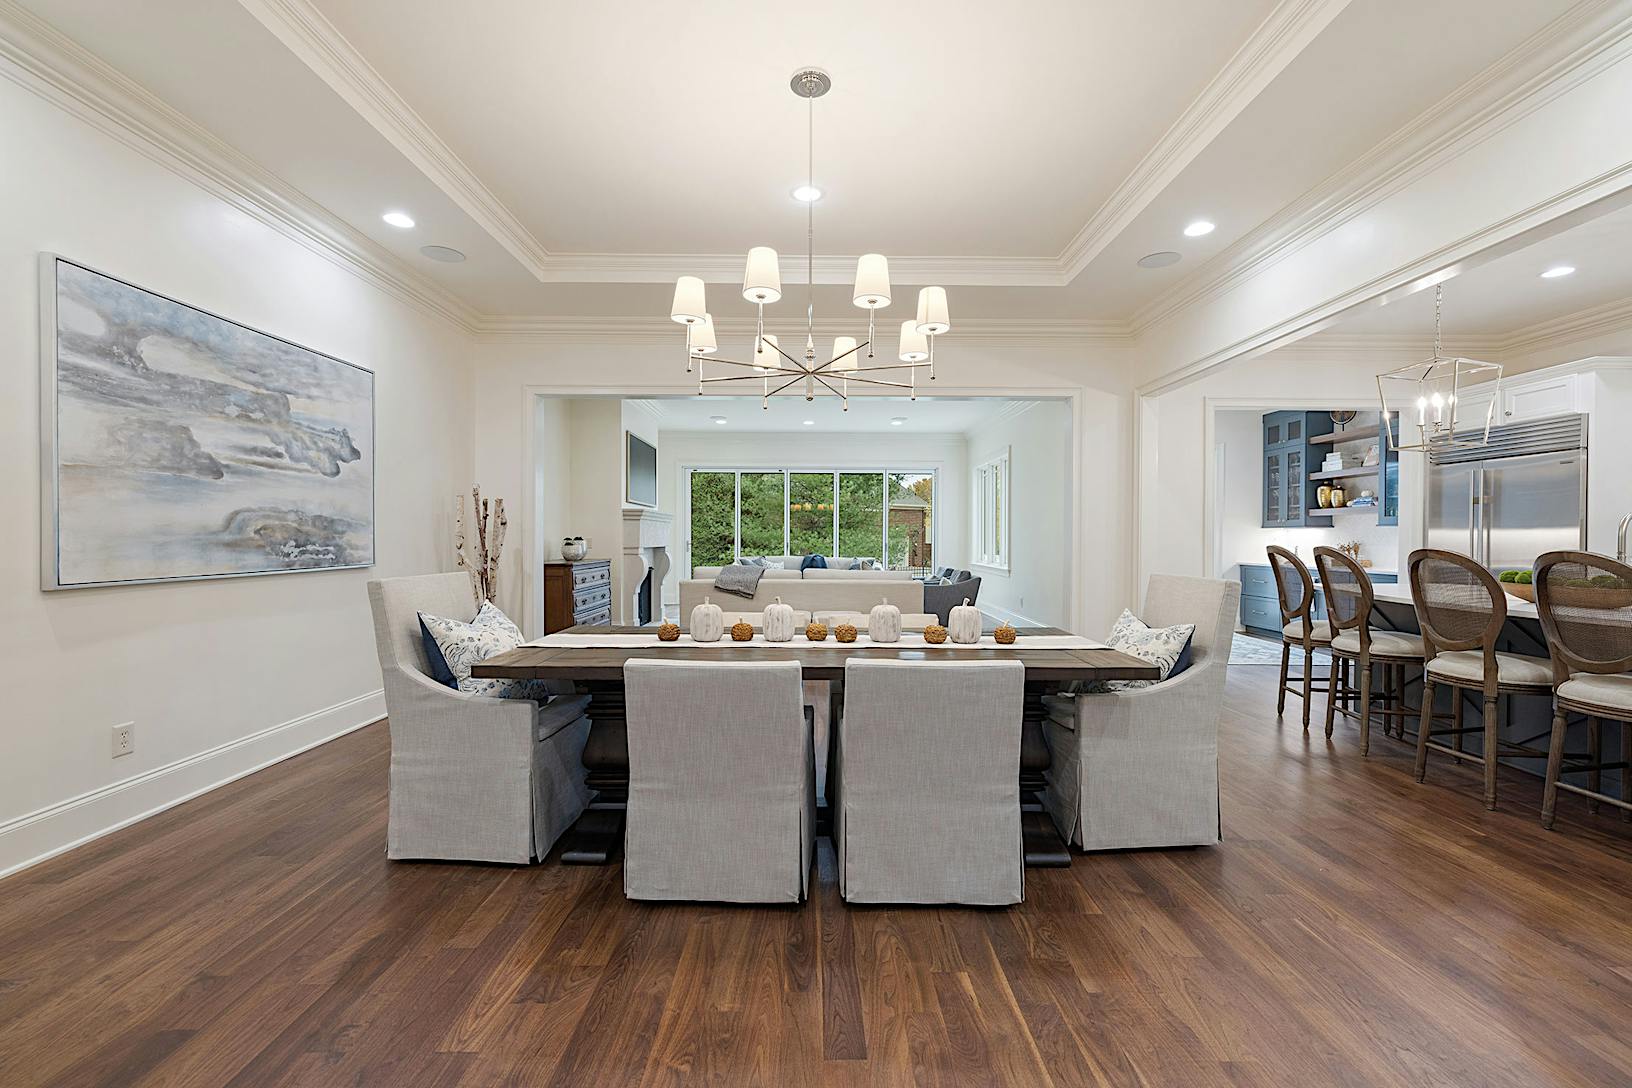 A dining room with folding glass walls hardwood floors and a chandelier